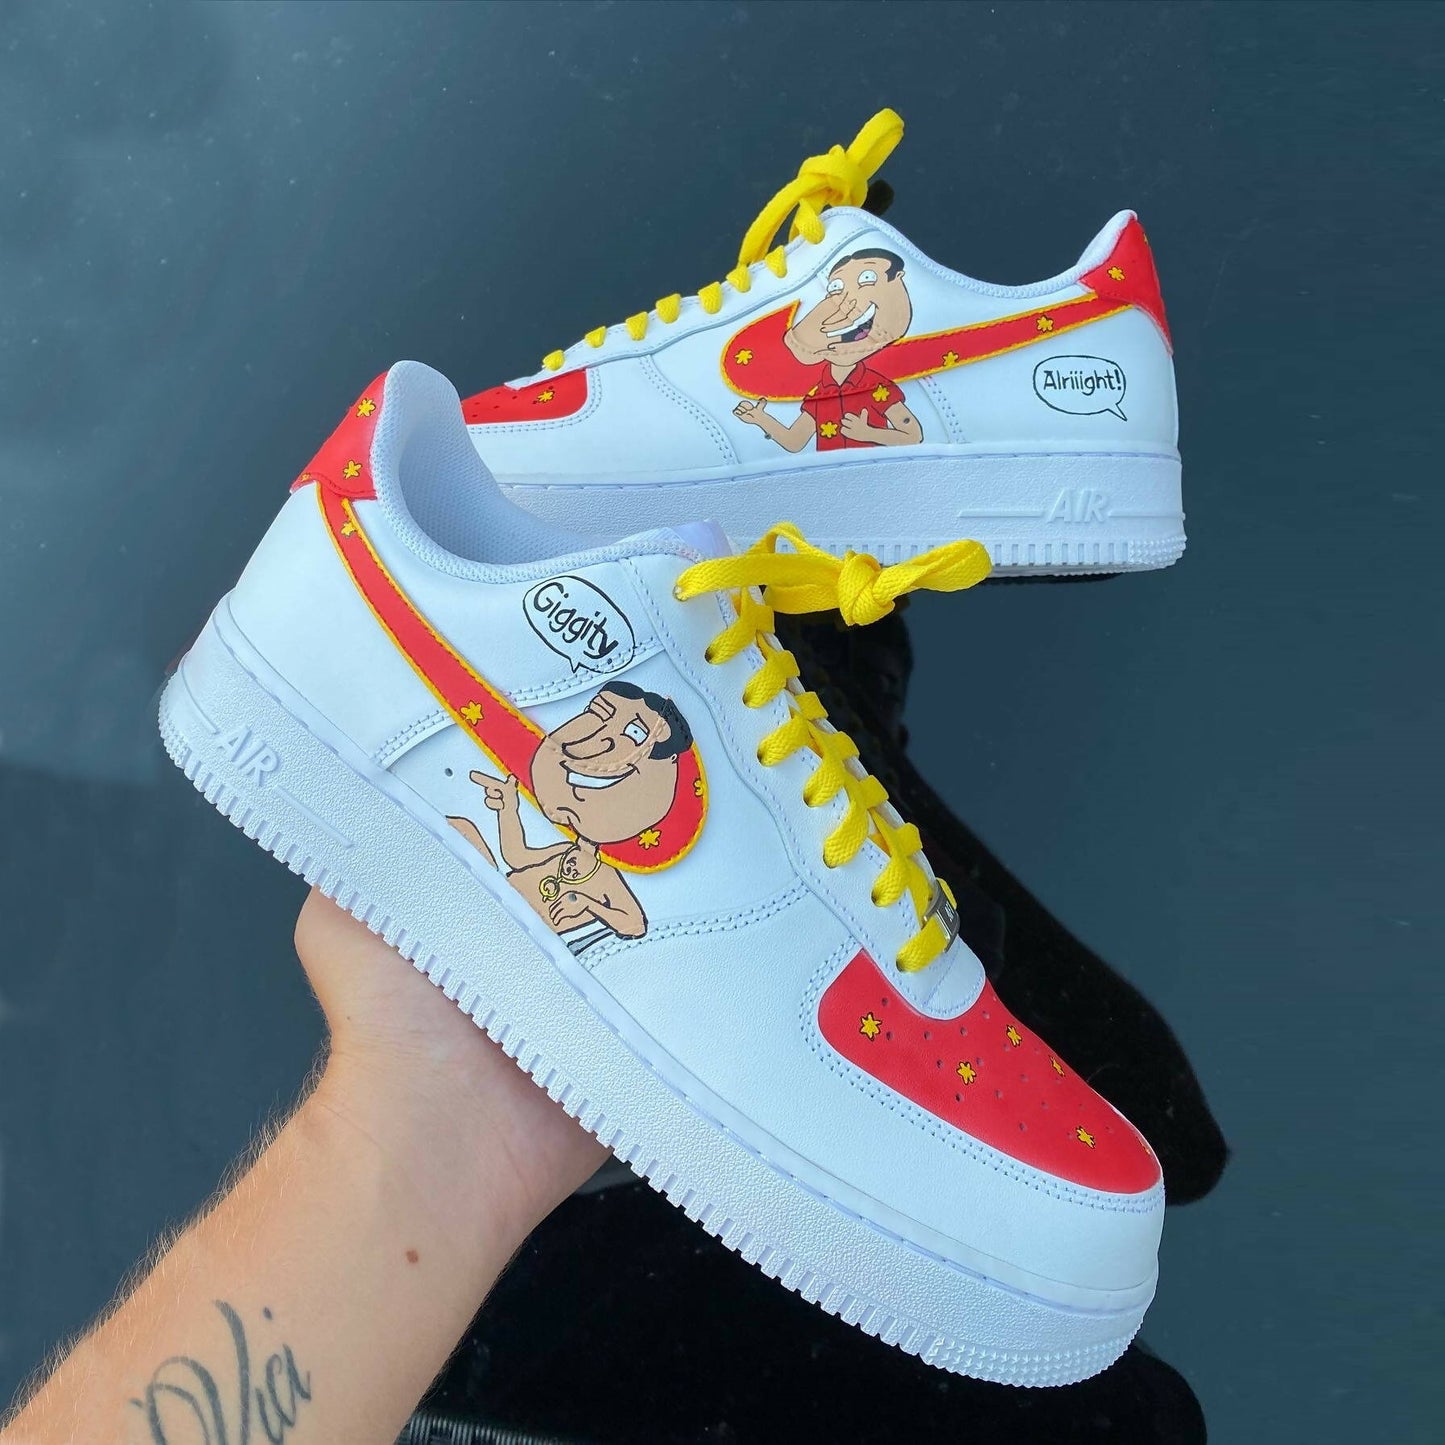 'Family Guy Giggity' Air Force 1